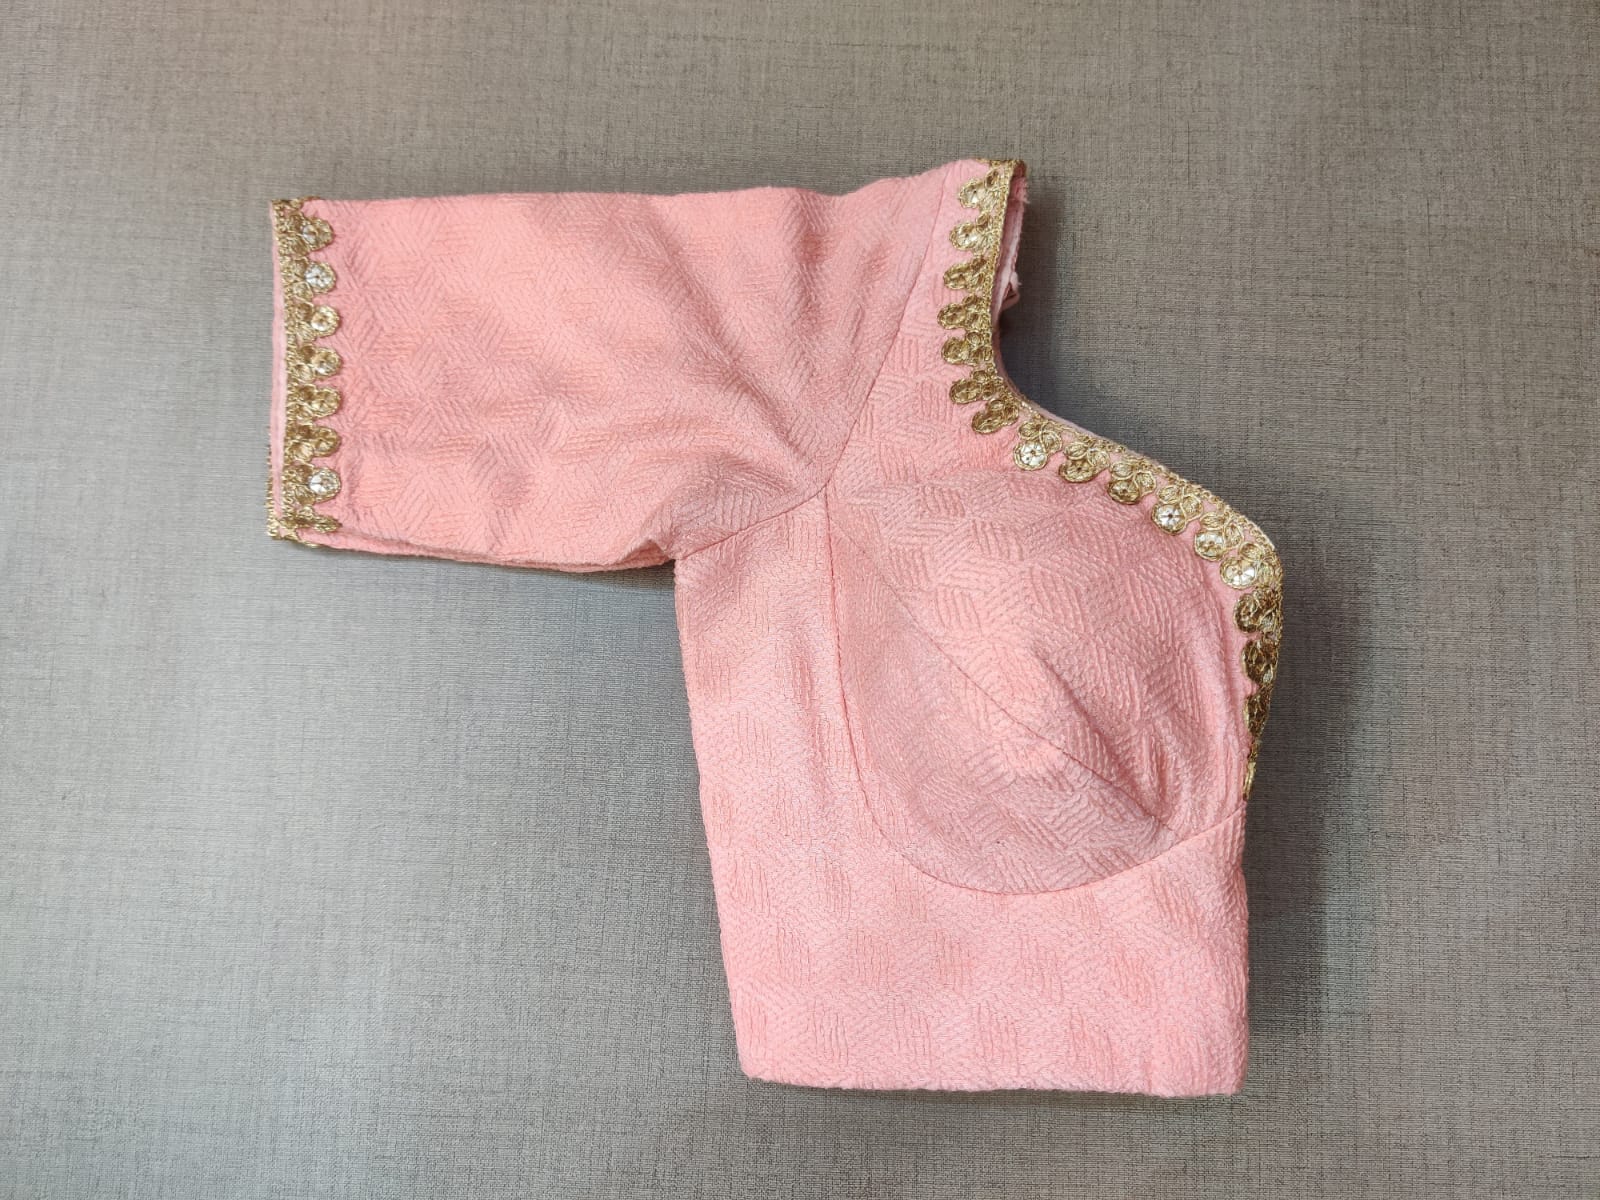 Buy rose pink ready made saree blouse with beautiful golden lace border online in USA. Crafted with beautiful golden lace border and dori ties, designer sari blouse, saree blouse with sweetheart cut neckline, long sleeves, designer sari blouses online, sari blouses from Pure Elegance Indian fashion store in USA.- Sleeve.